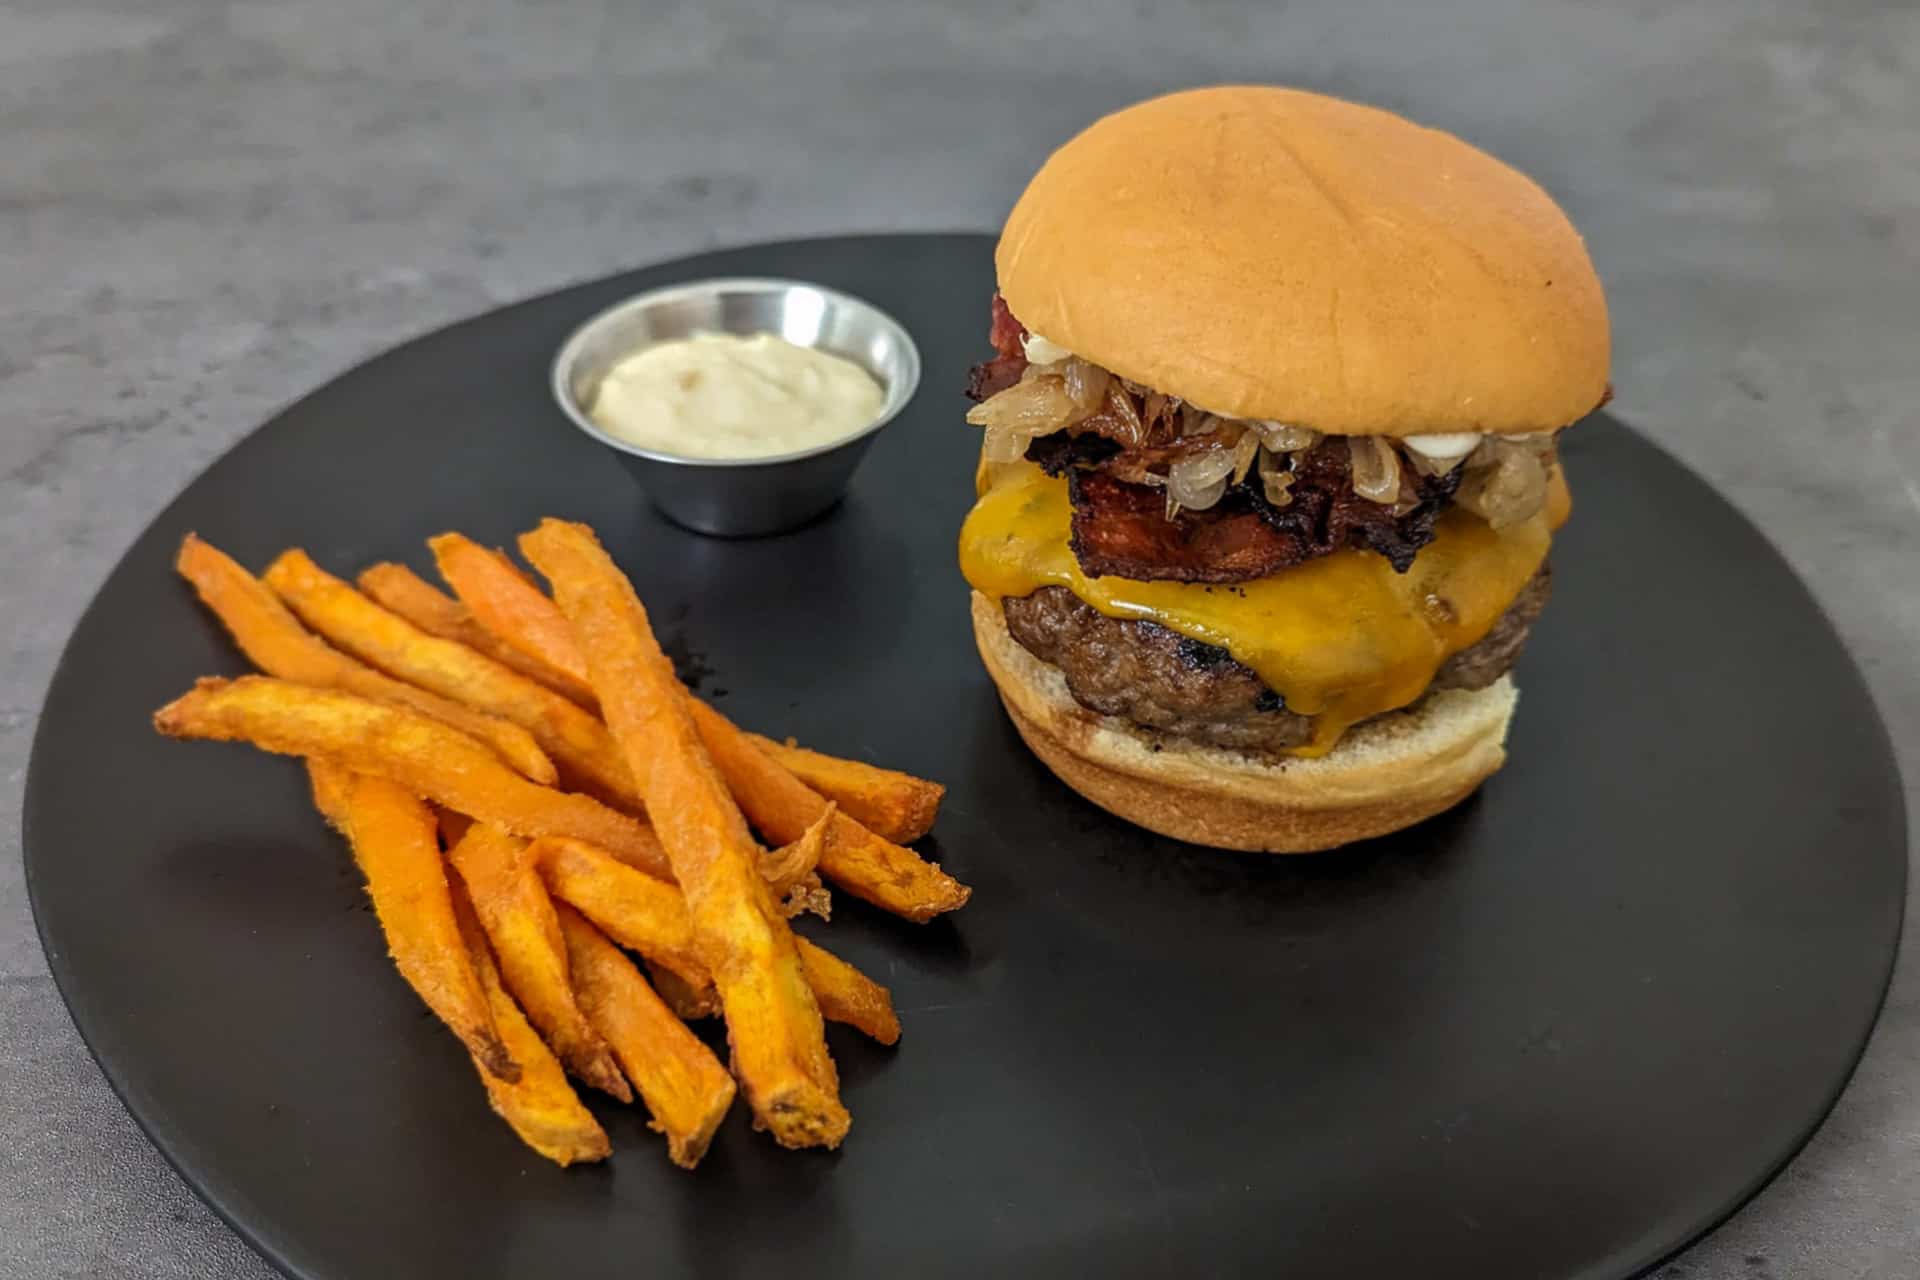 A bacon cheeseburger with roasted garlic aioli and caramelized onions served with sweet potato fries